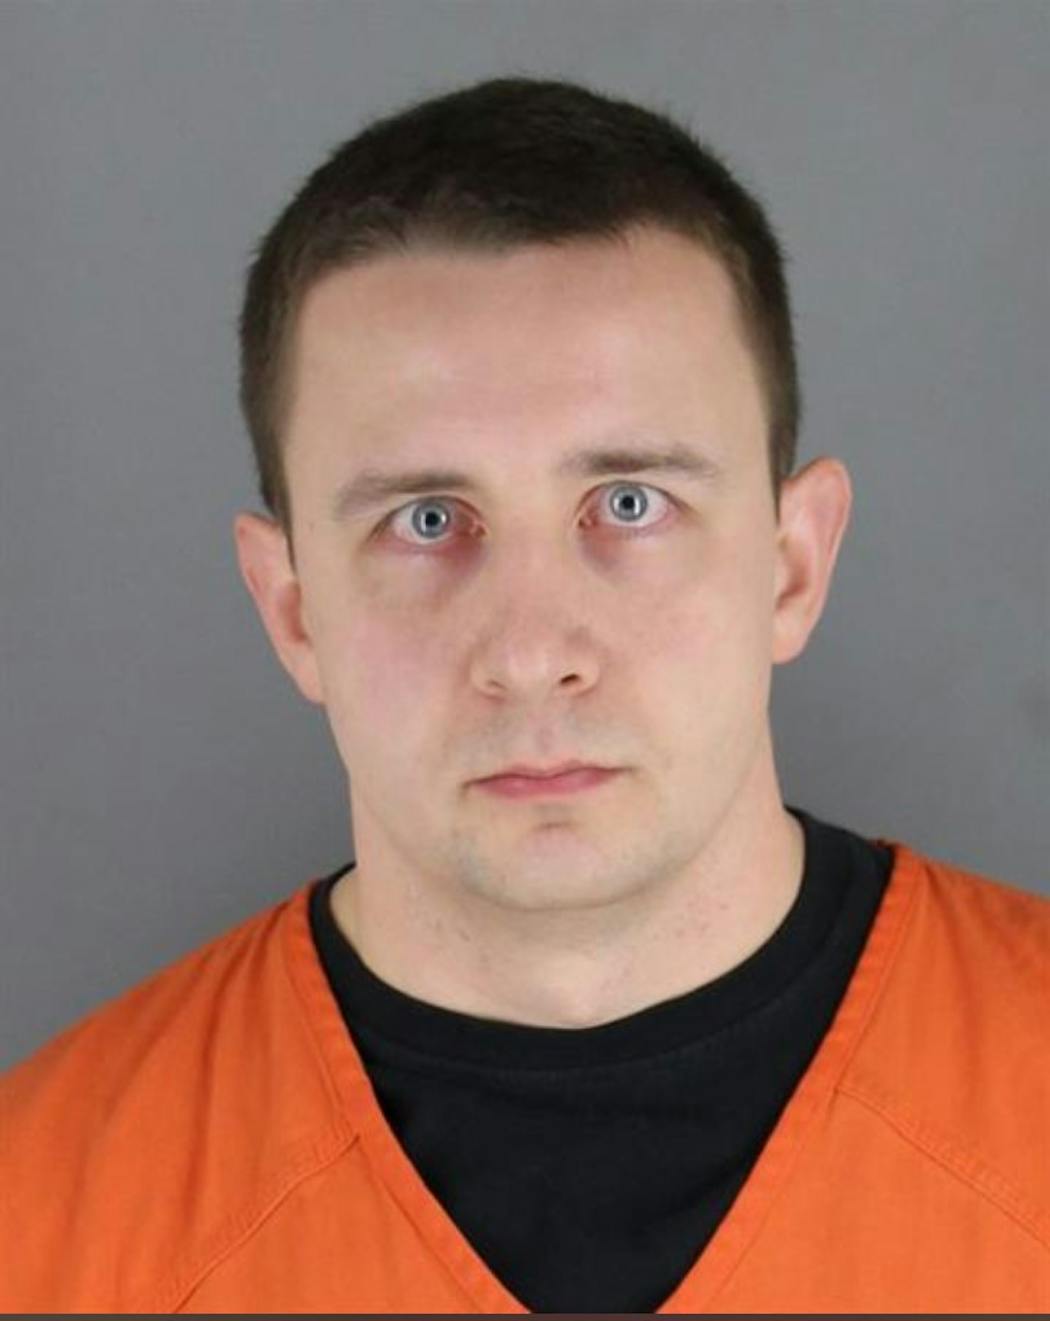 Trooper Ryan Londregan was booked into the Hennepin County jail Tuesday.